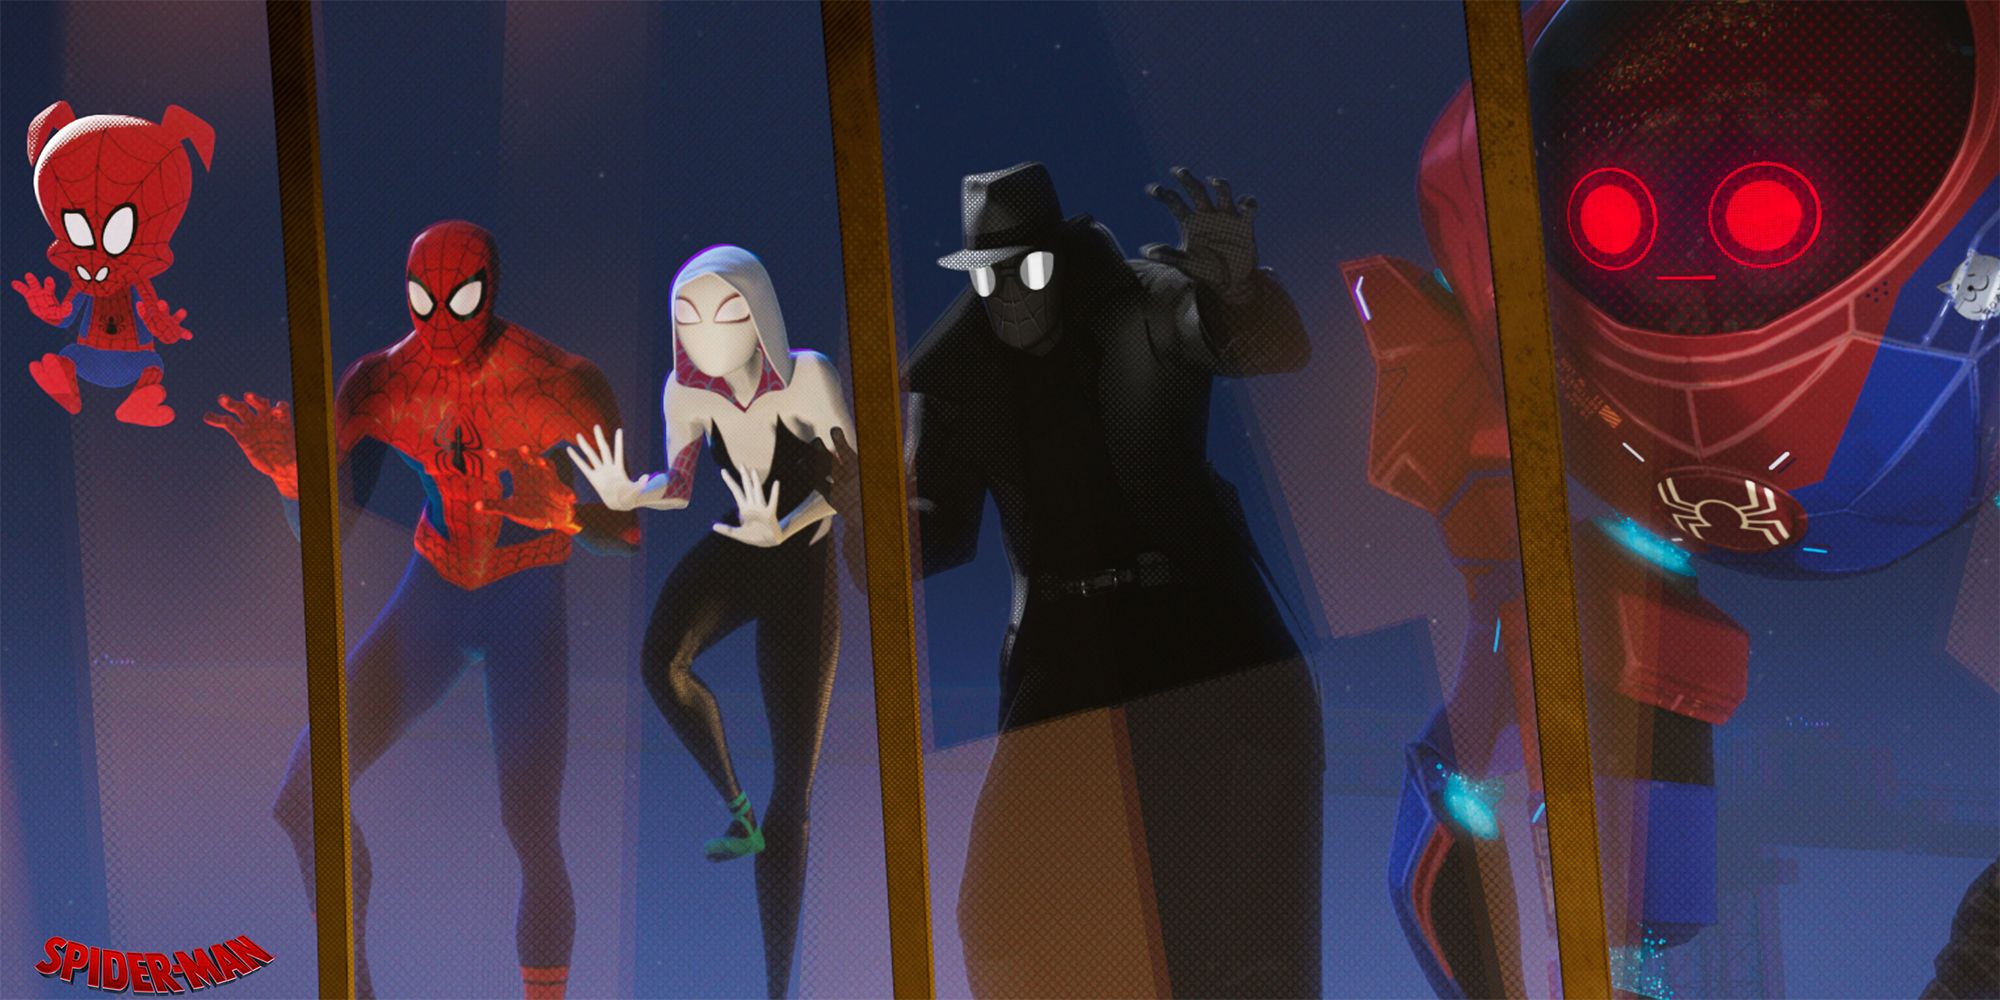 spider-man noir and spider-pig in into the spiderverse